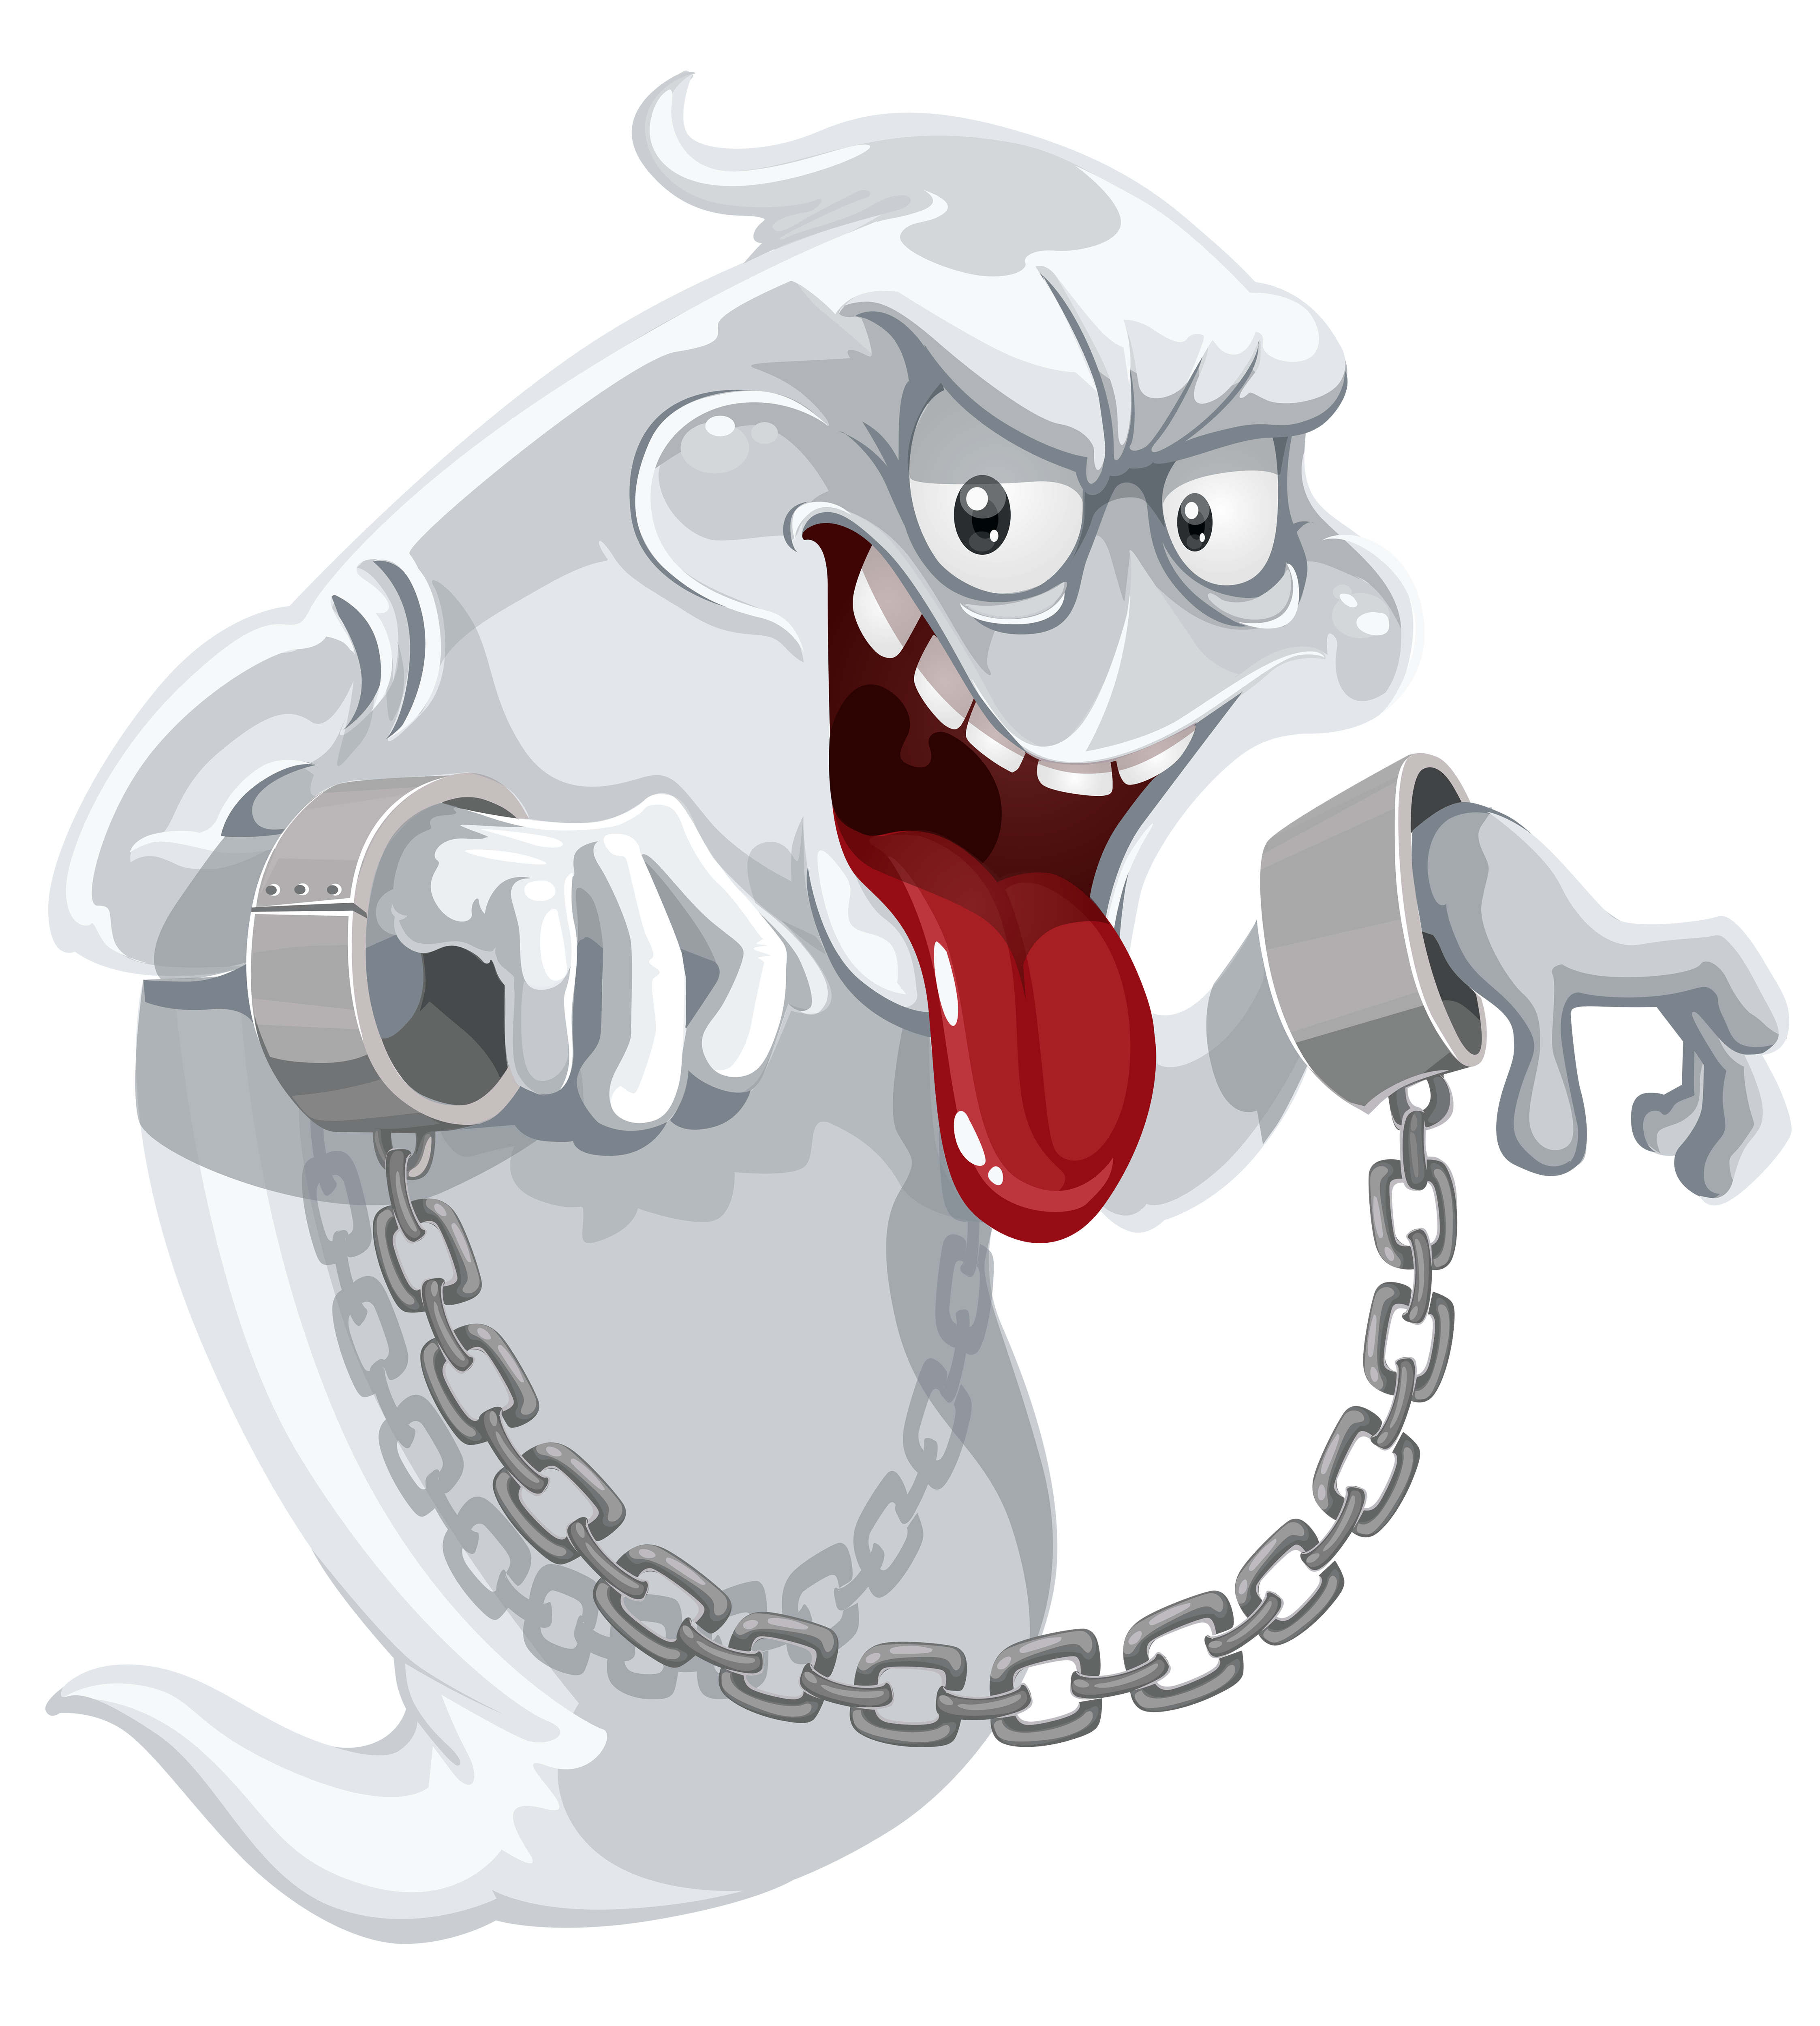 Hi clipart world hello day. Evil ghost with chains